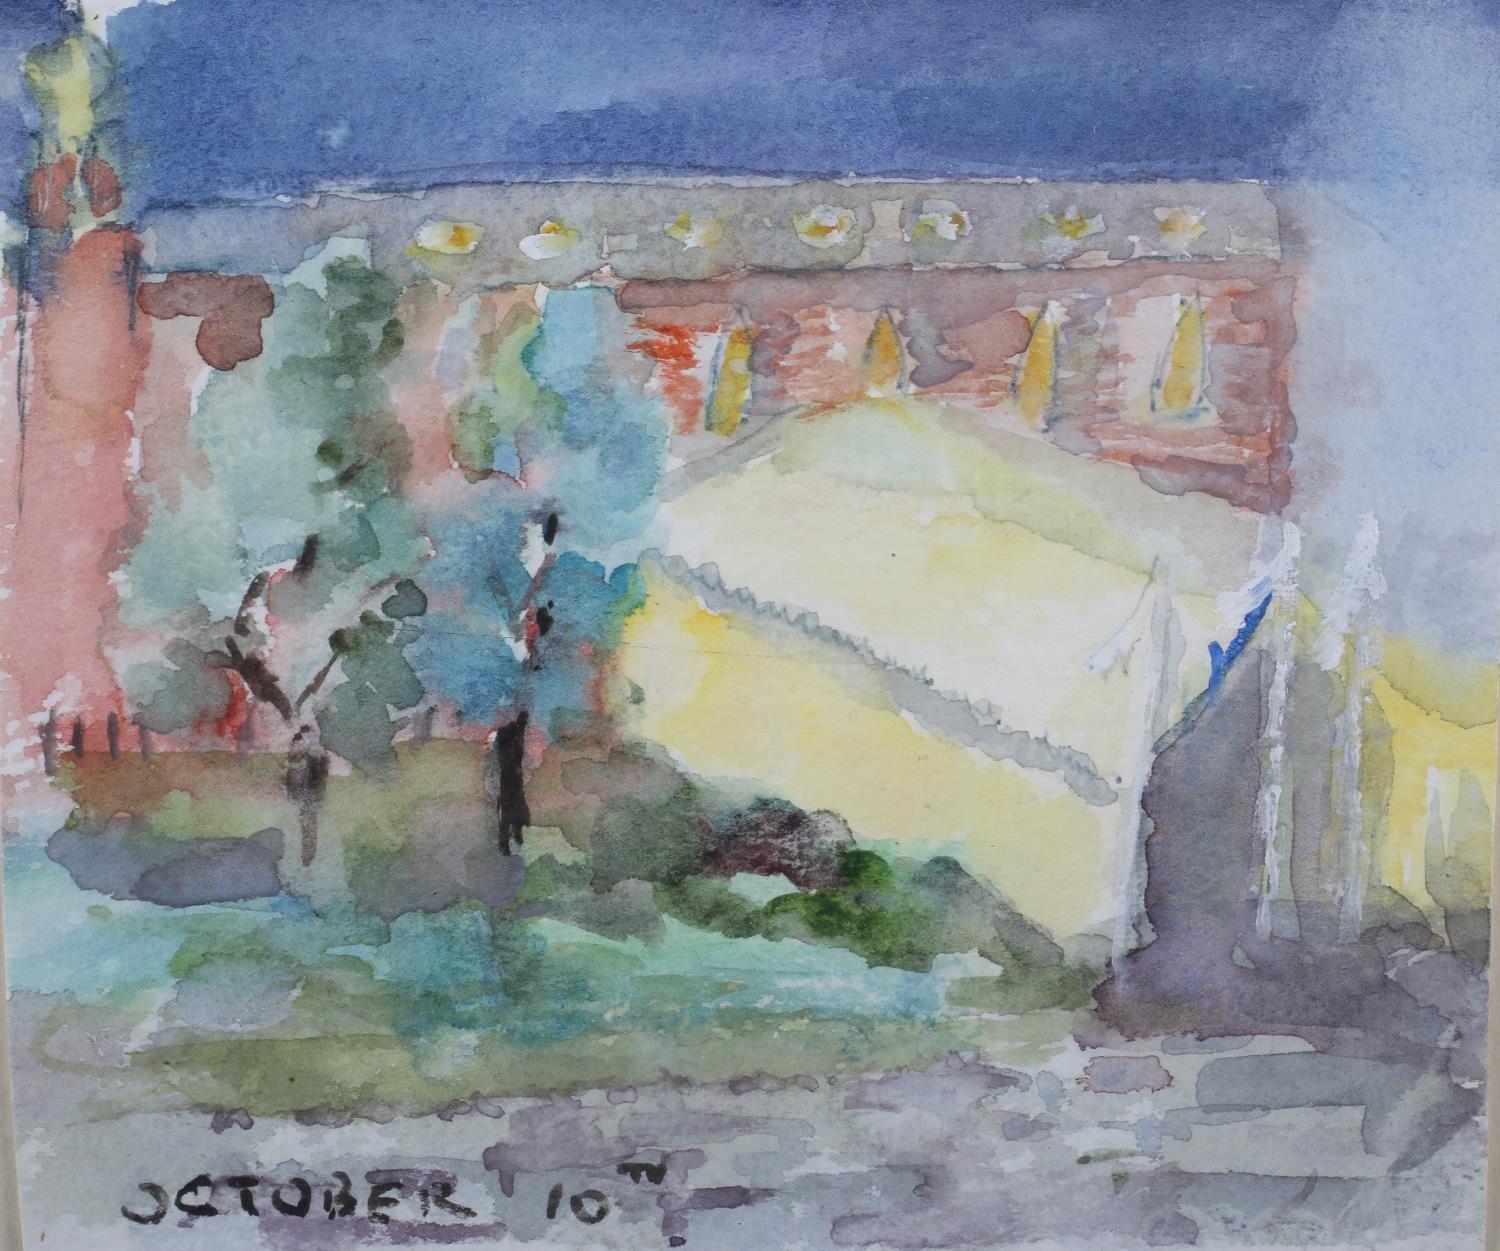 ARR Elizabeth Boyle, Contemporary, Park Square, Leeds with marquee, watercolour, dated 'October